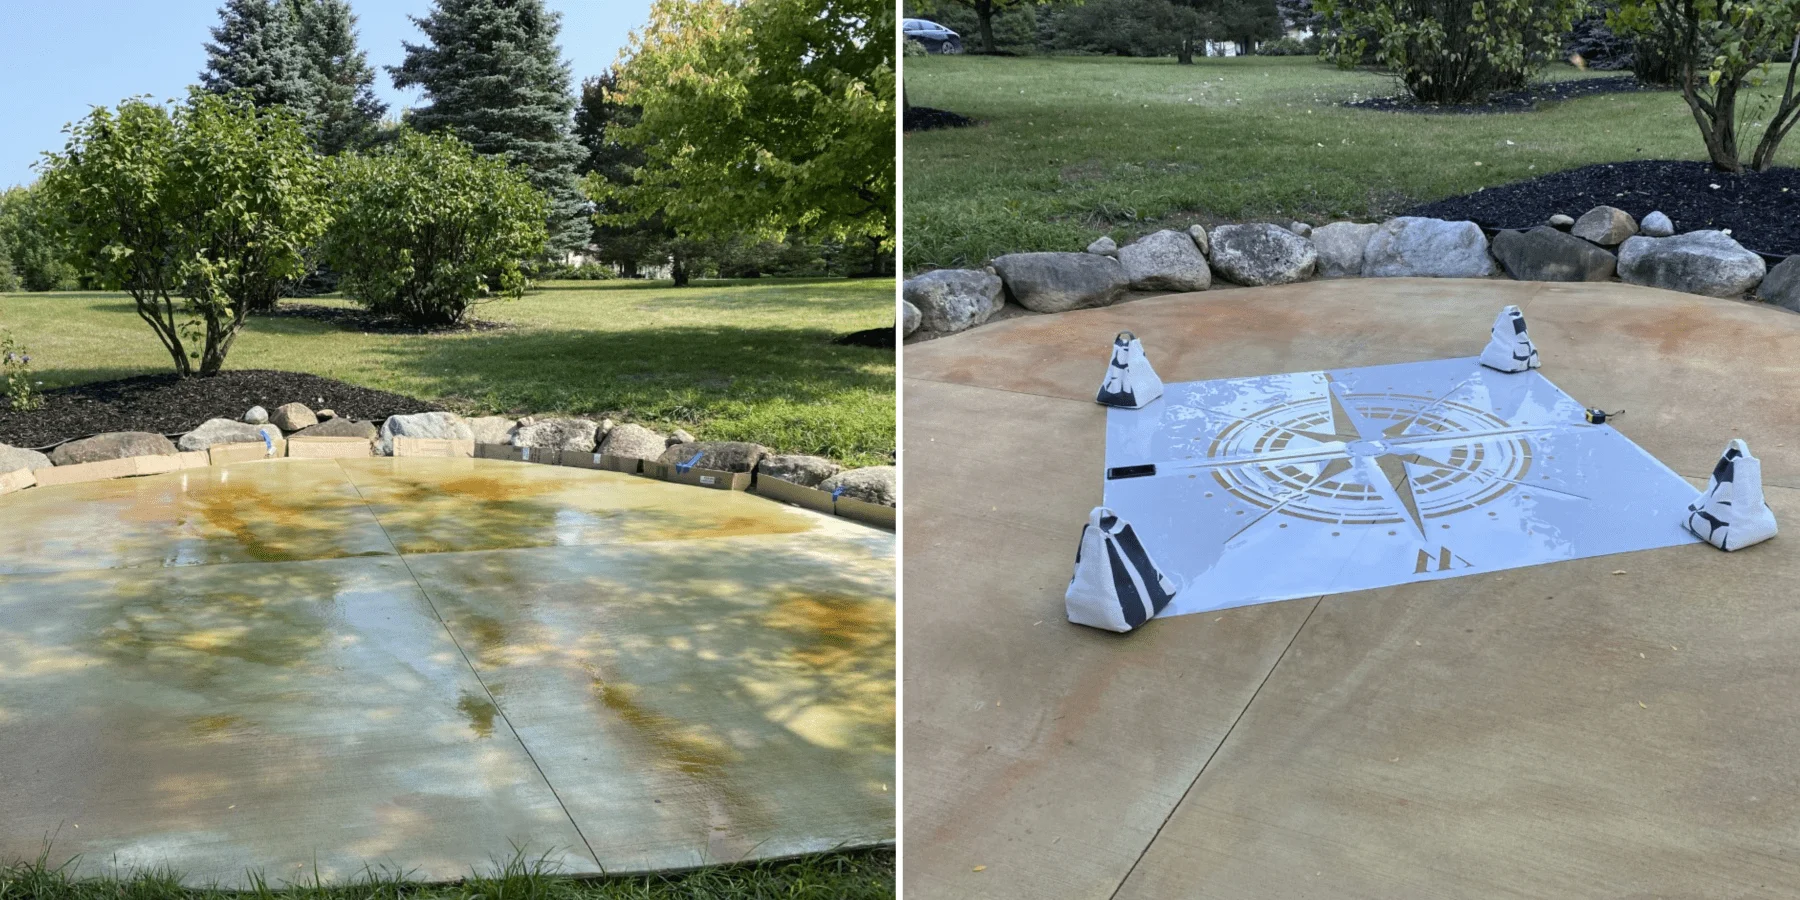 Before and after images of a concrete patio renovation. On the left, the patio has a freshly stained appearance with warm sand and cola acid stains, giving it a variegated earth-toned finish. On the right, a large compass design stencil is being placed onto the patio surface, with weight bags at the corners to hold it down for tracing